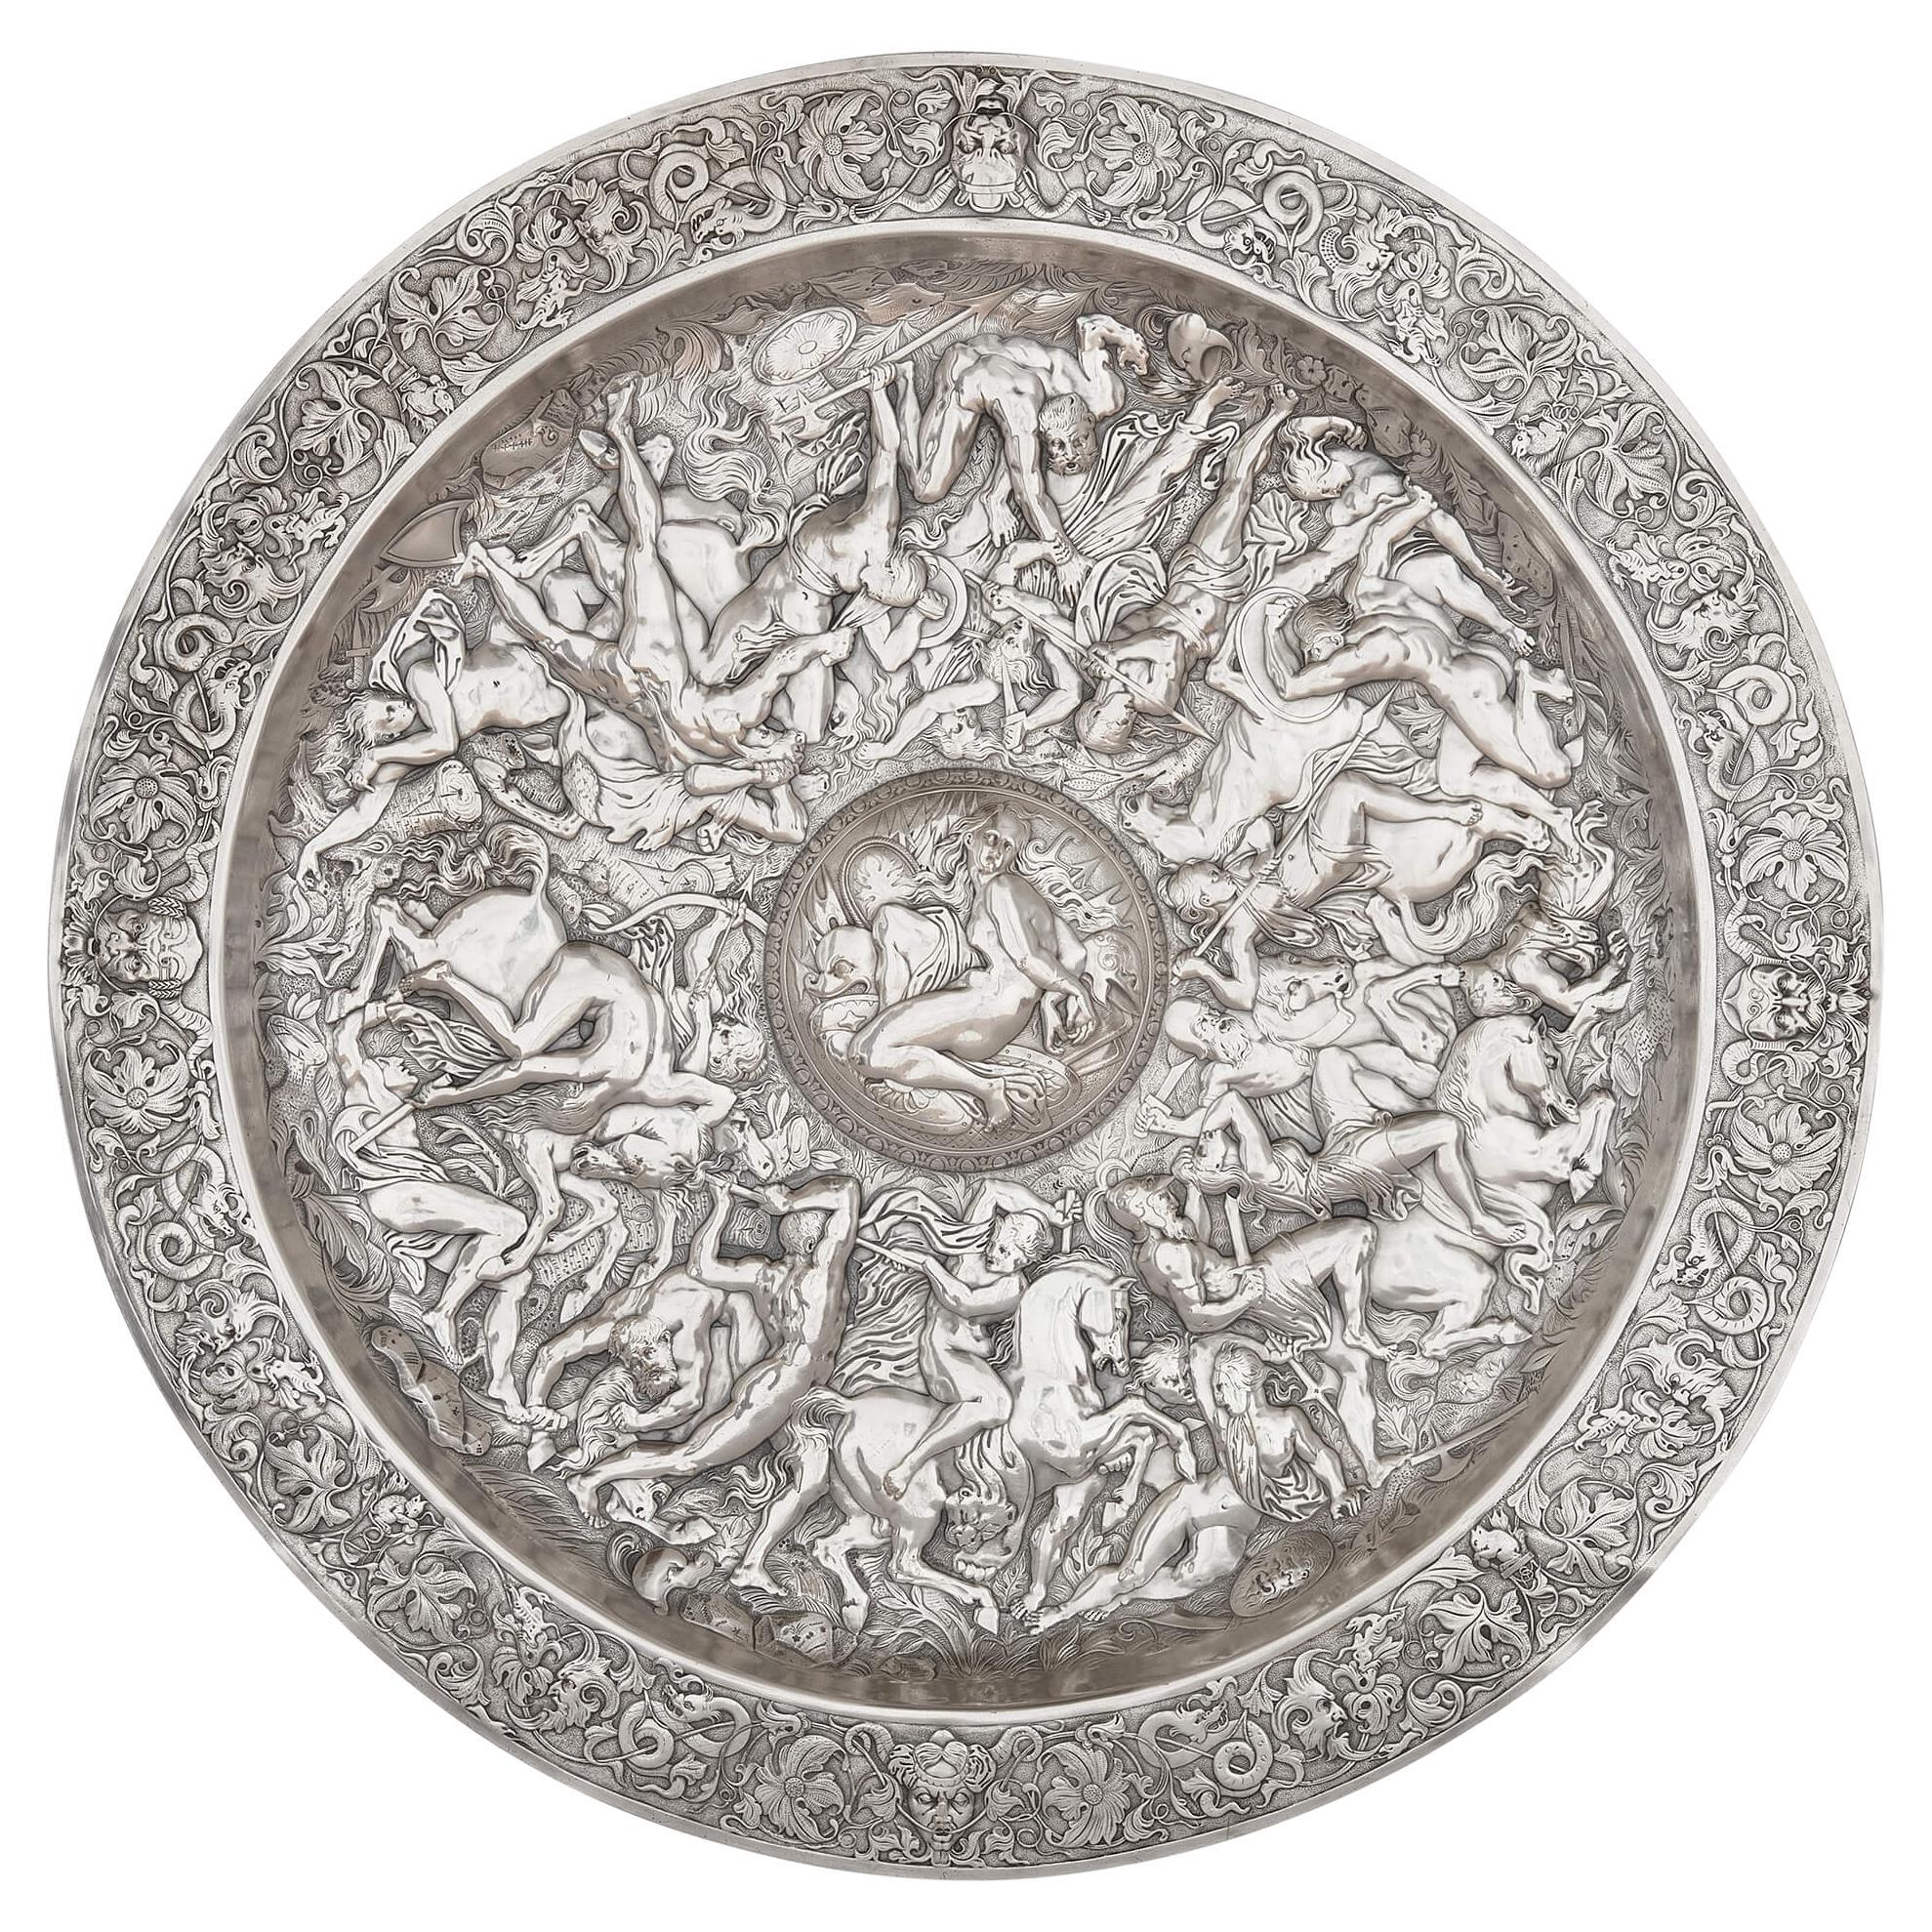 Large Silver Plate Charger of the 'Battle of the Amazons' by Elkington & Co